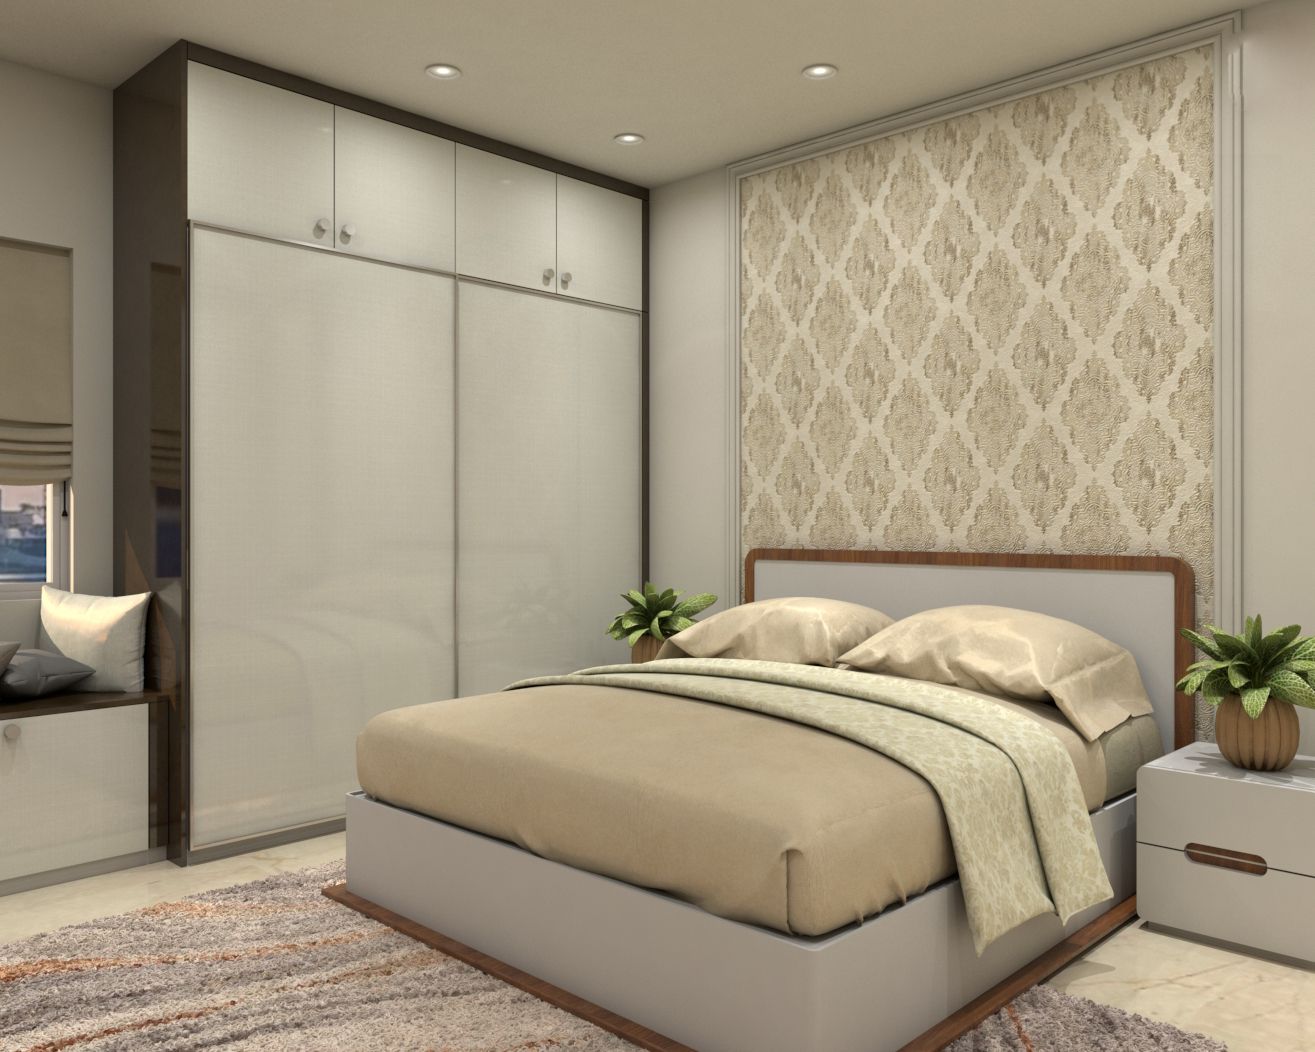 Modern Spacious Guest Room Interior With Wardrobe